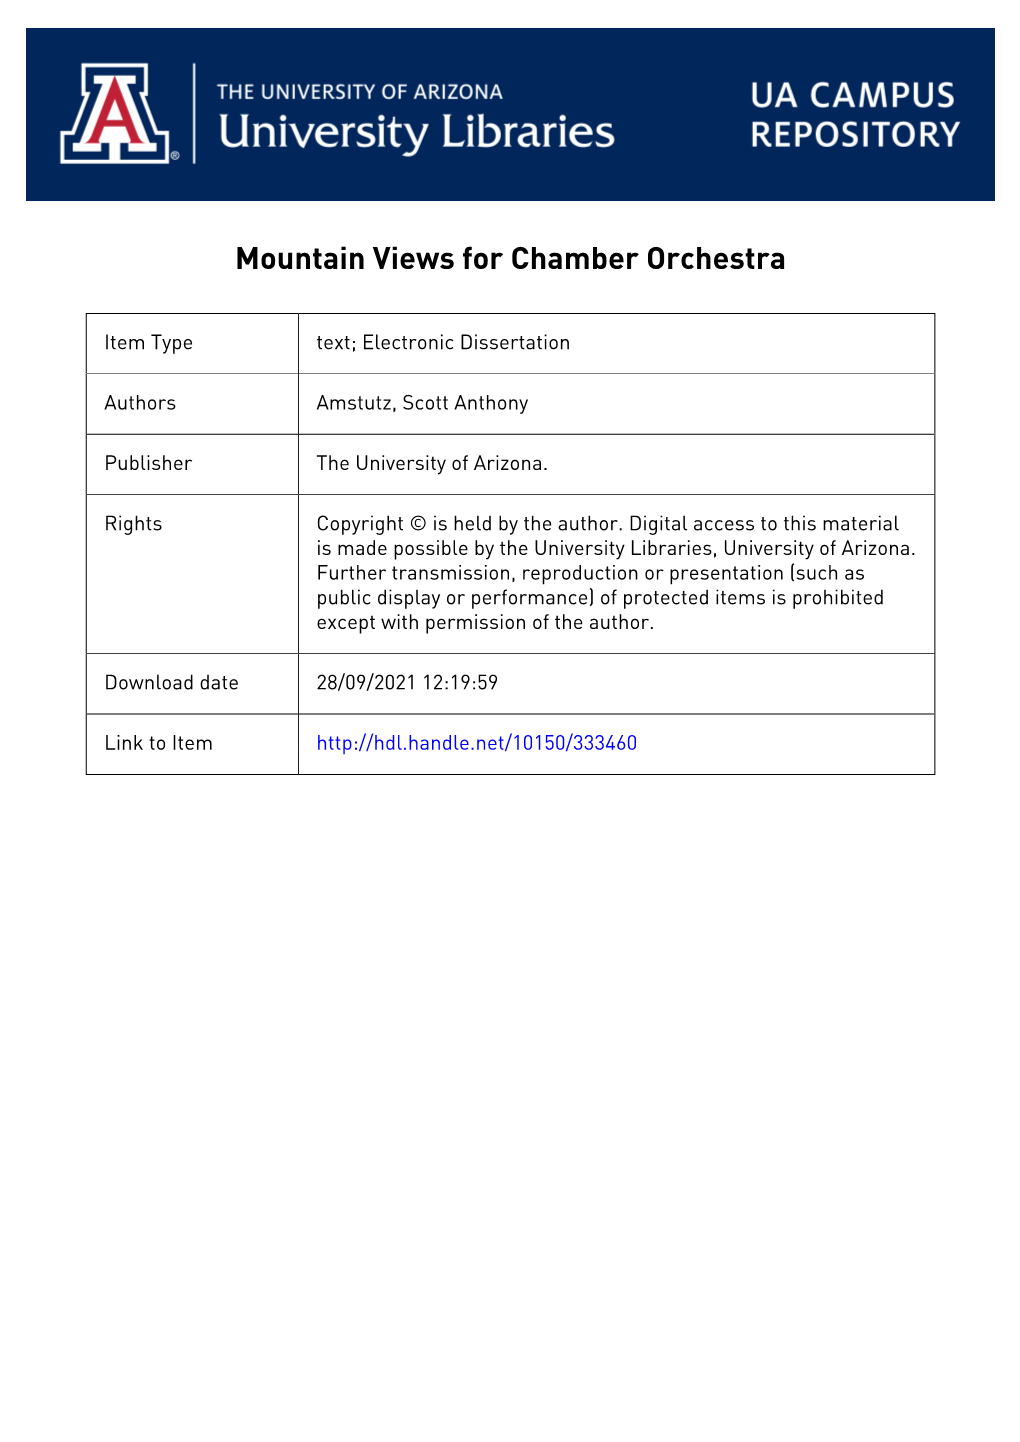 MOUNTAIN VIEWS for CHAMBER ORCHESTRA by Scott Anthony